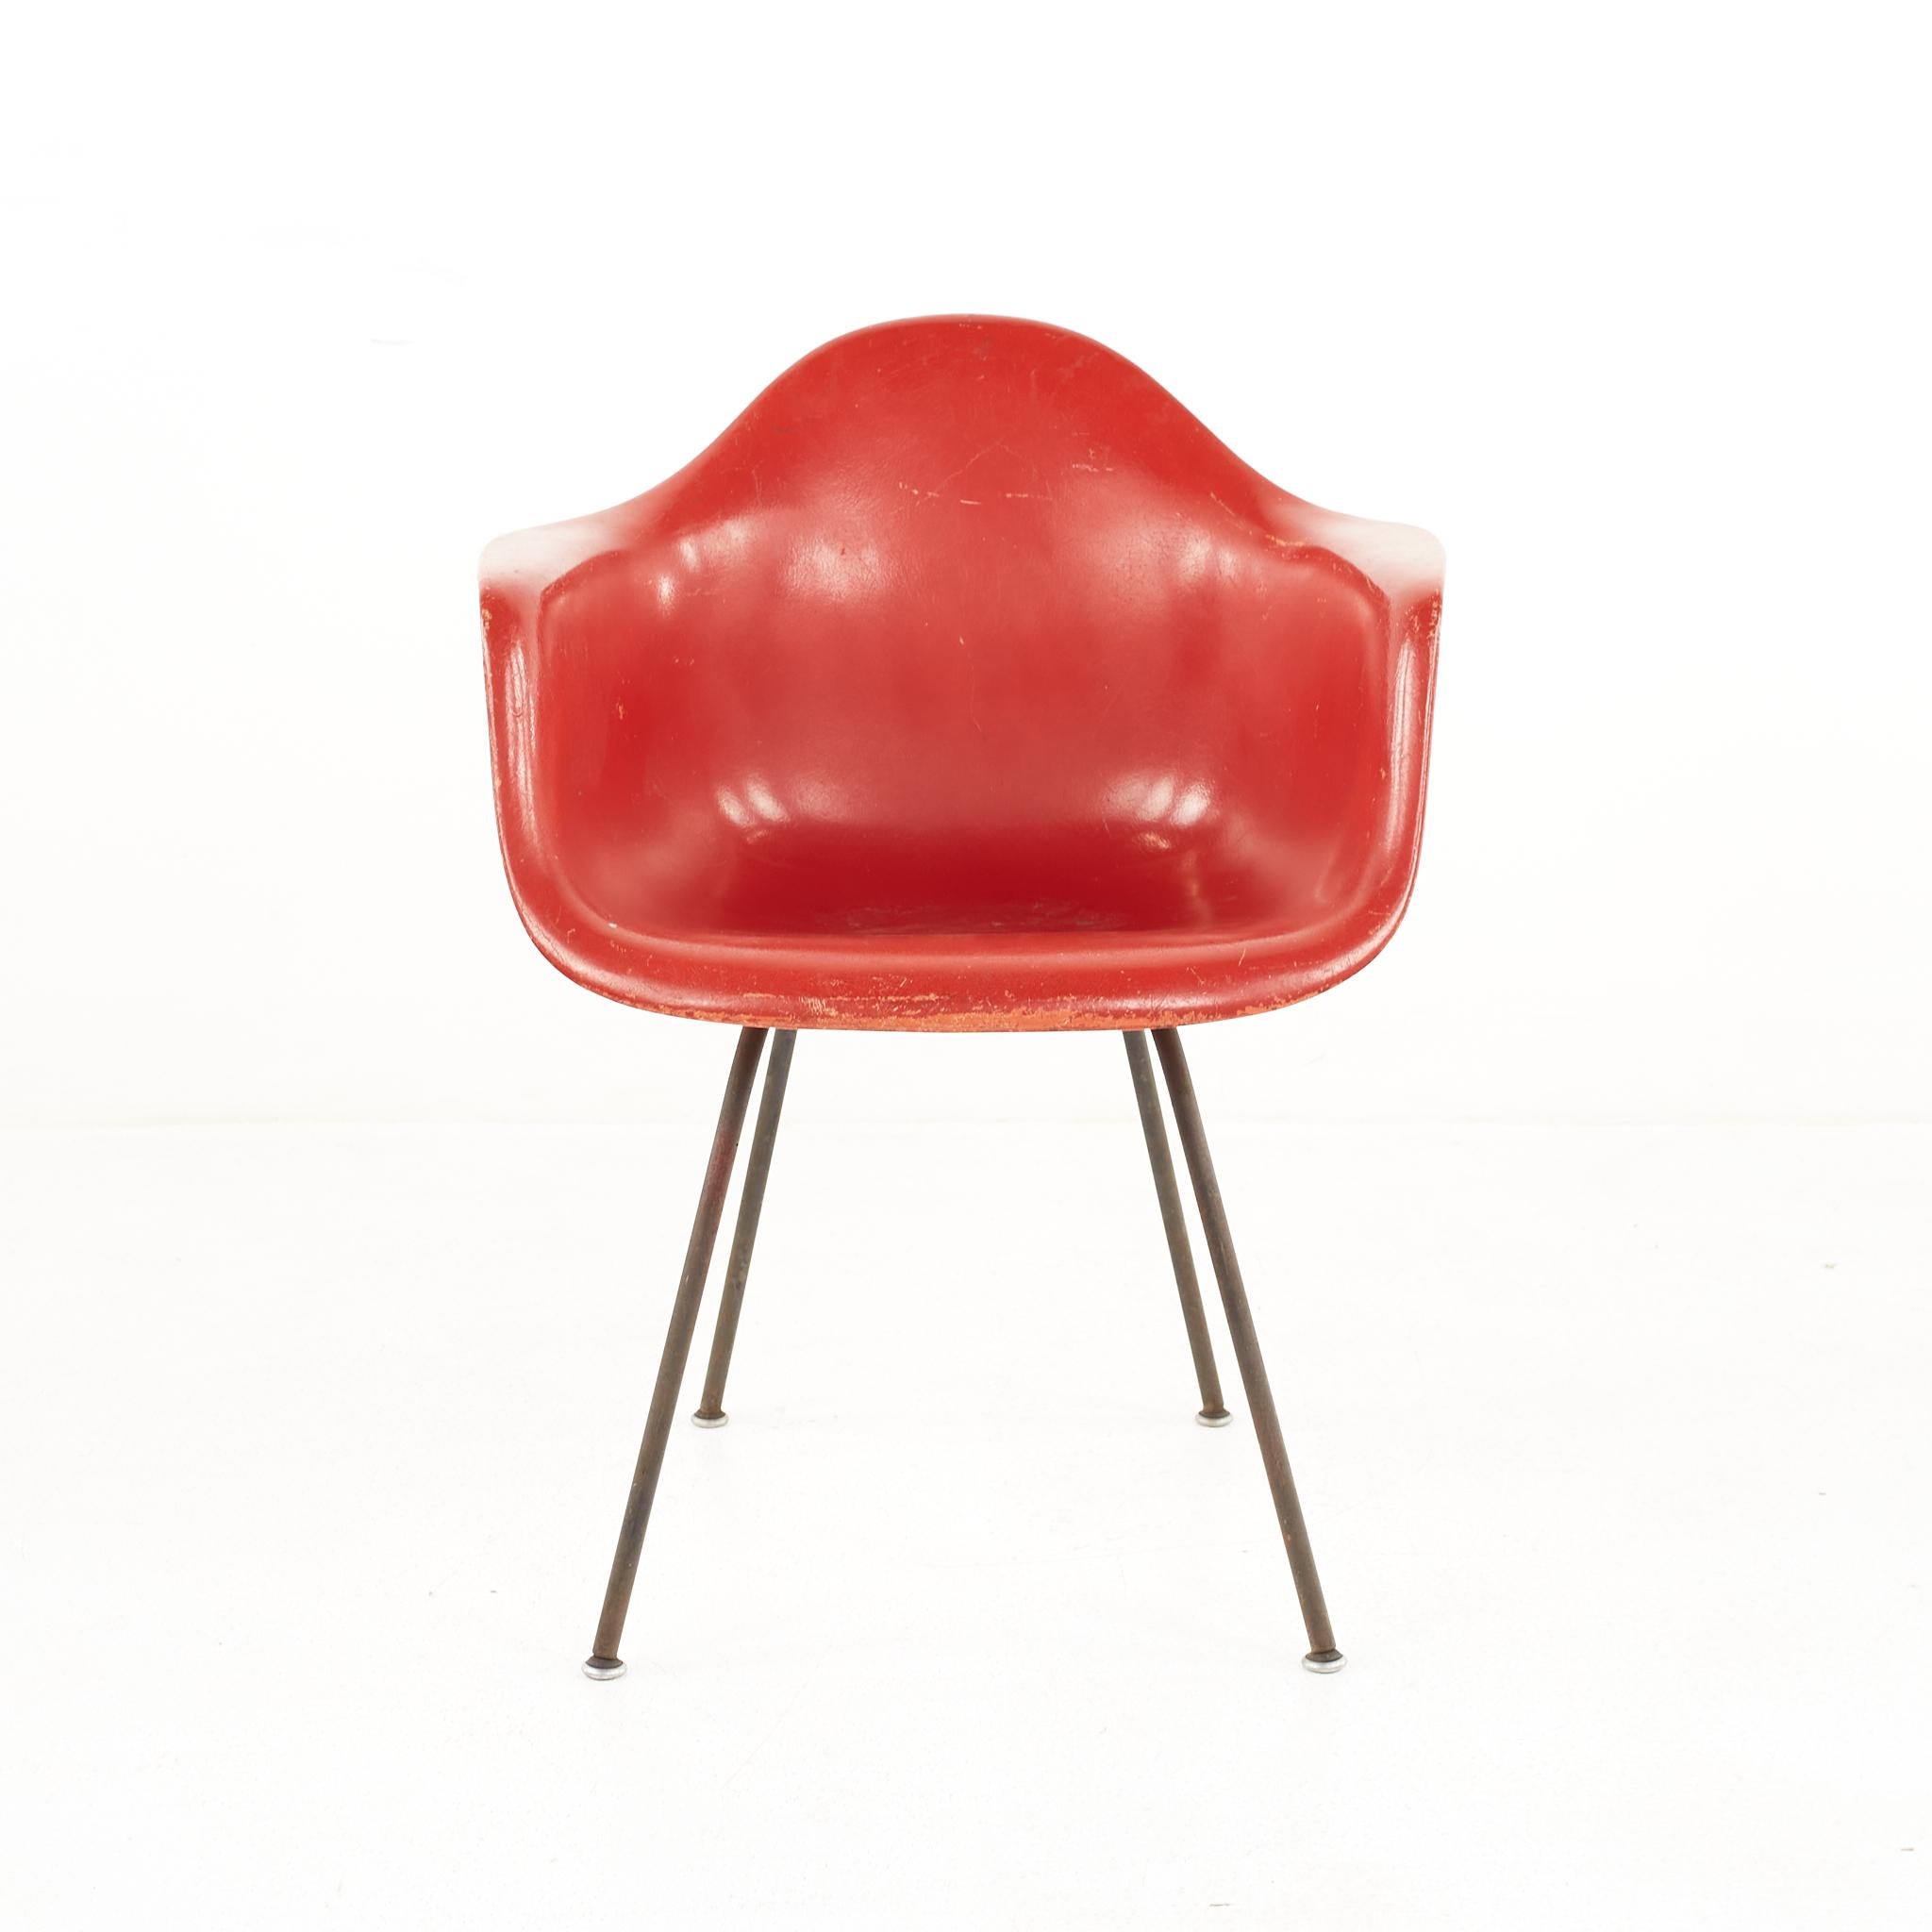 Eames For Herman Miller Mid Century Fiberglass Shell Red Chair

The chair measures: 24.75 wide x 22 deep x 31.25 high, with a seat height of 18 inches and arm height of 26 inches 

All pieces of furniture can be had in what we call restored